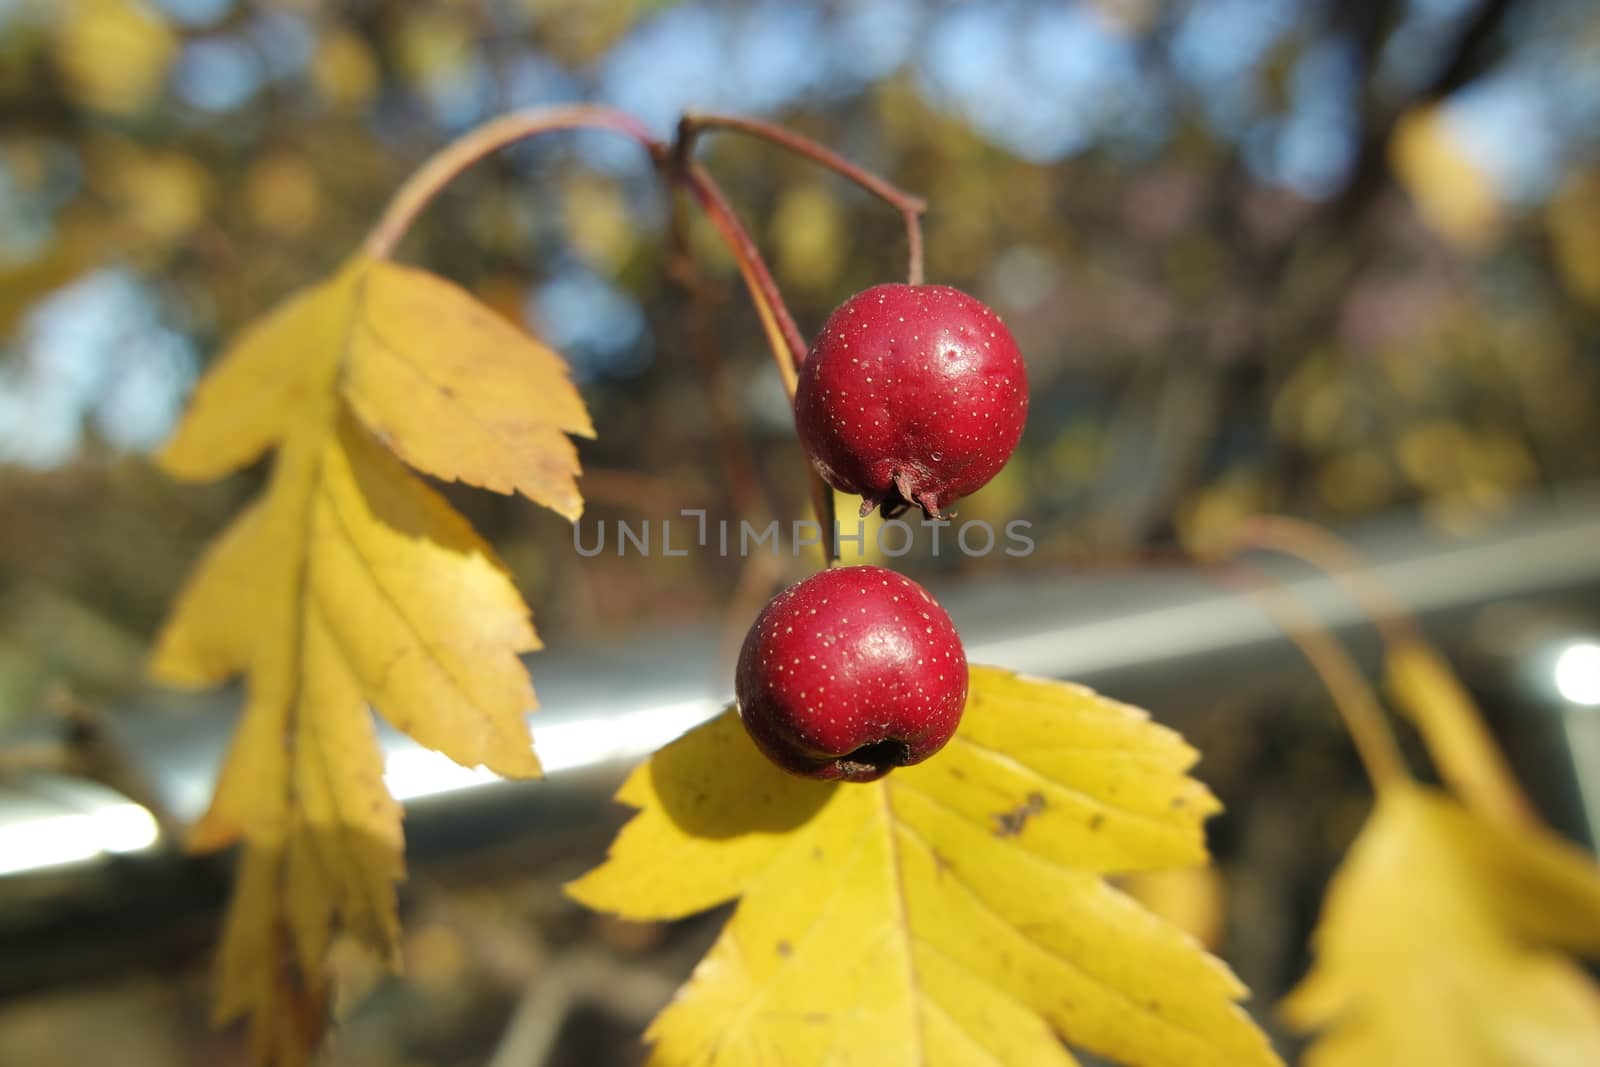 Close up of ripe red berries on branches of rose hips tree with golden leaves in autumn season